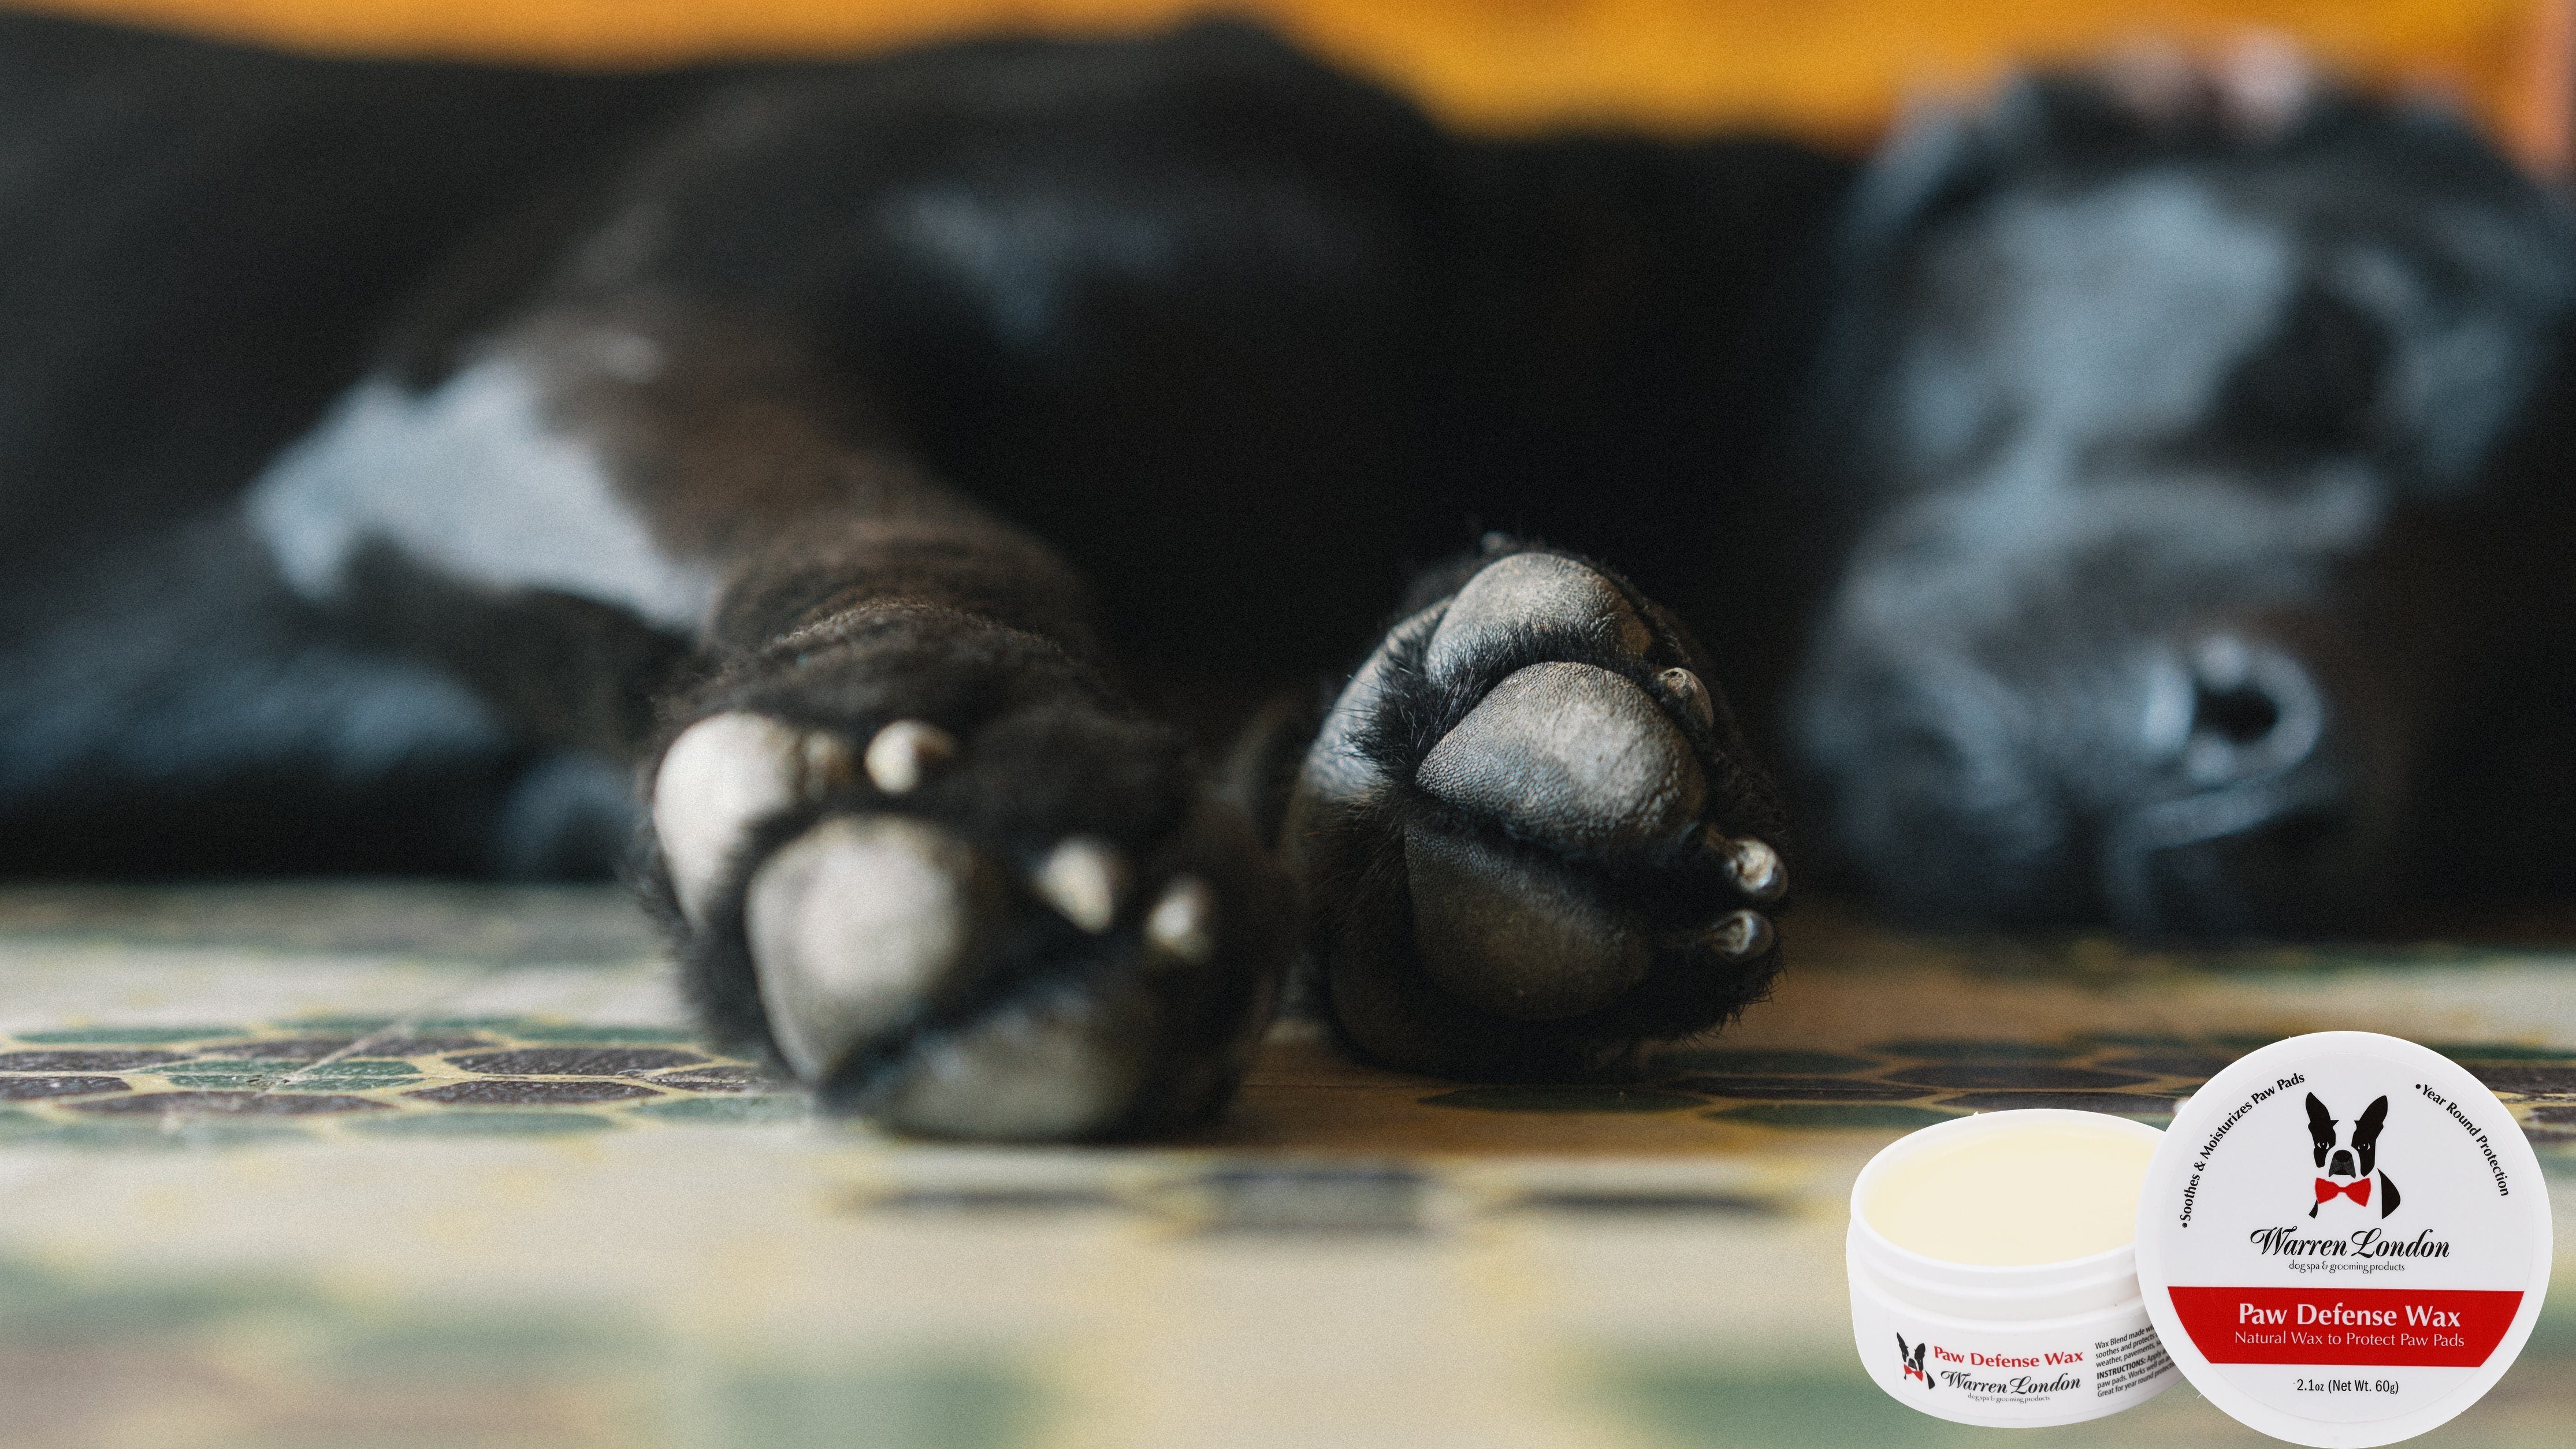 Paw Defense Wax - Soothes, Moisturizes and Protects Dog's Paw Pads Spa Product Warren London 